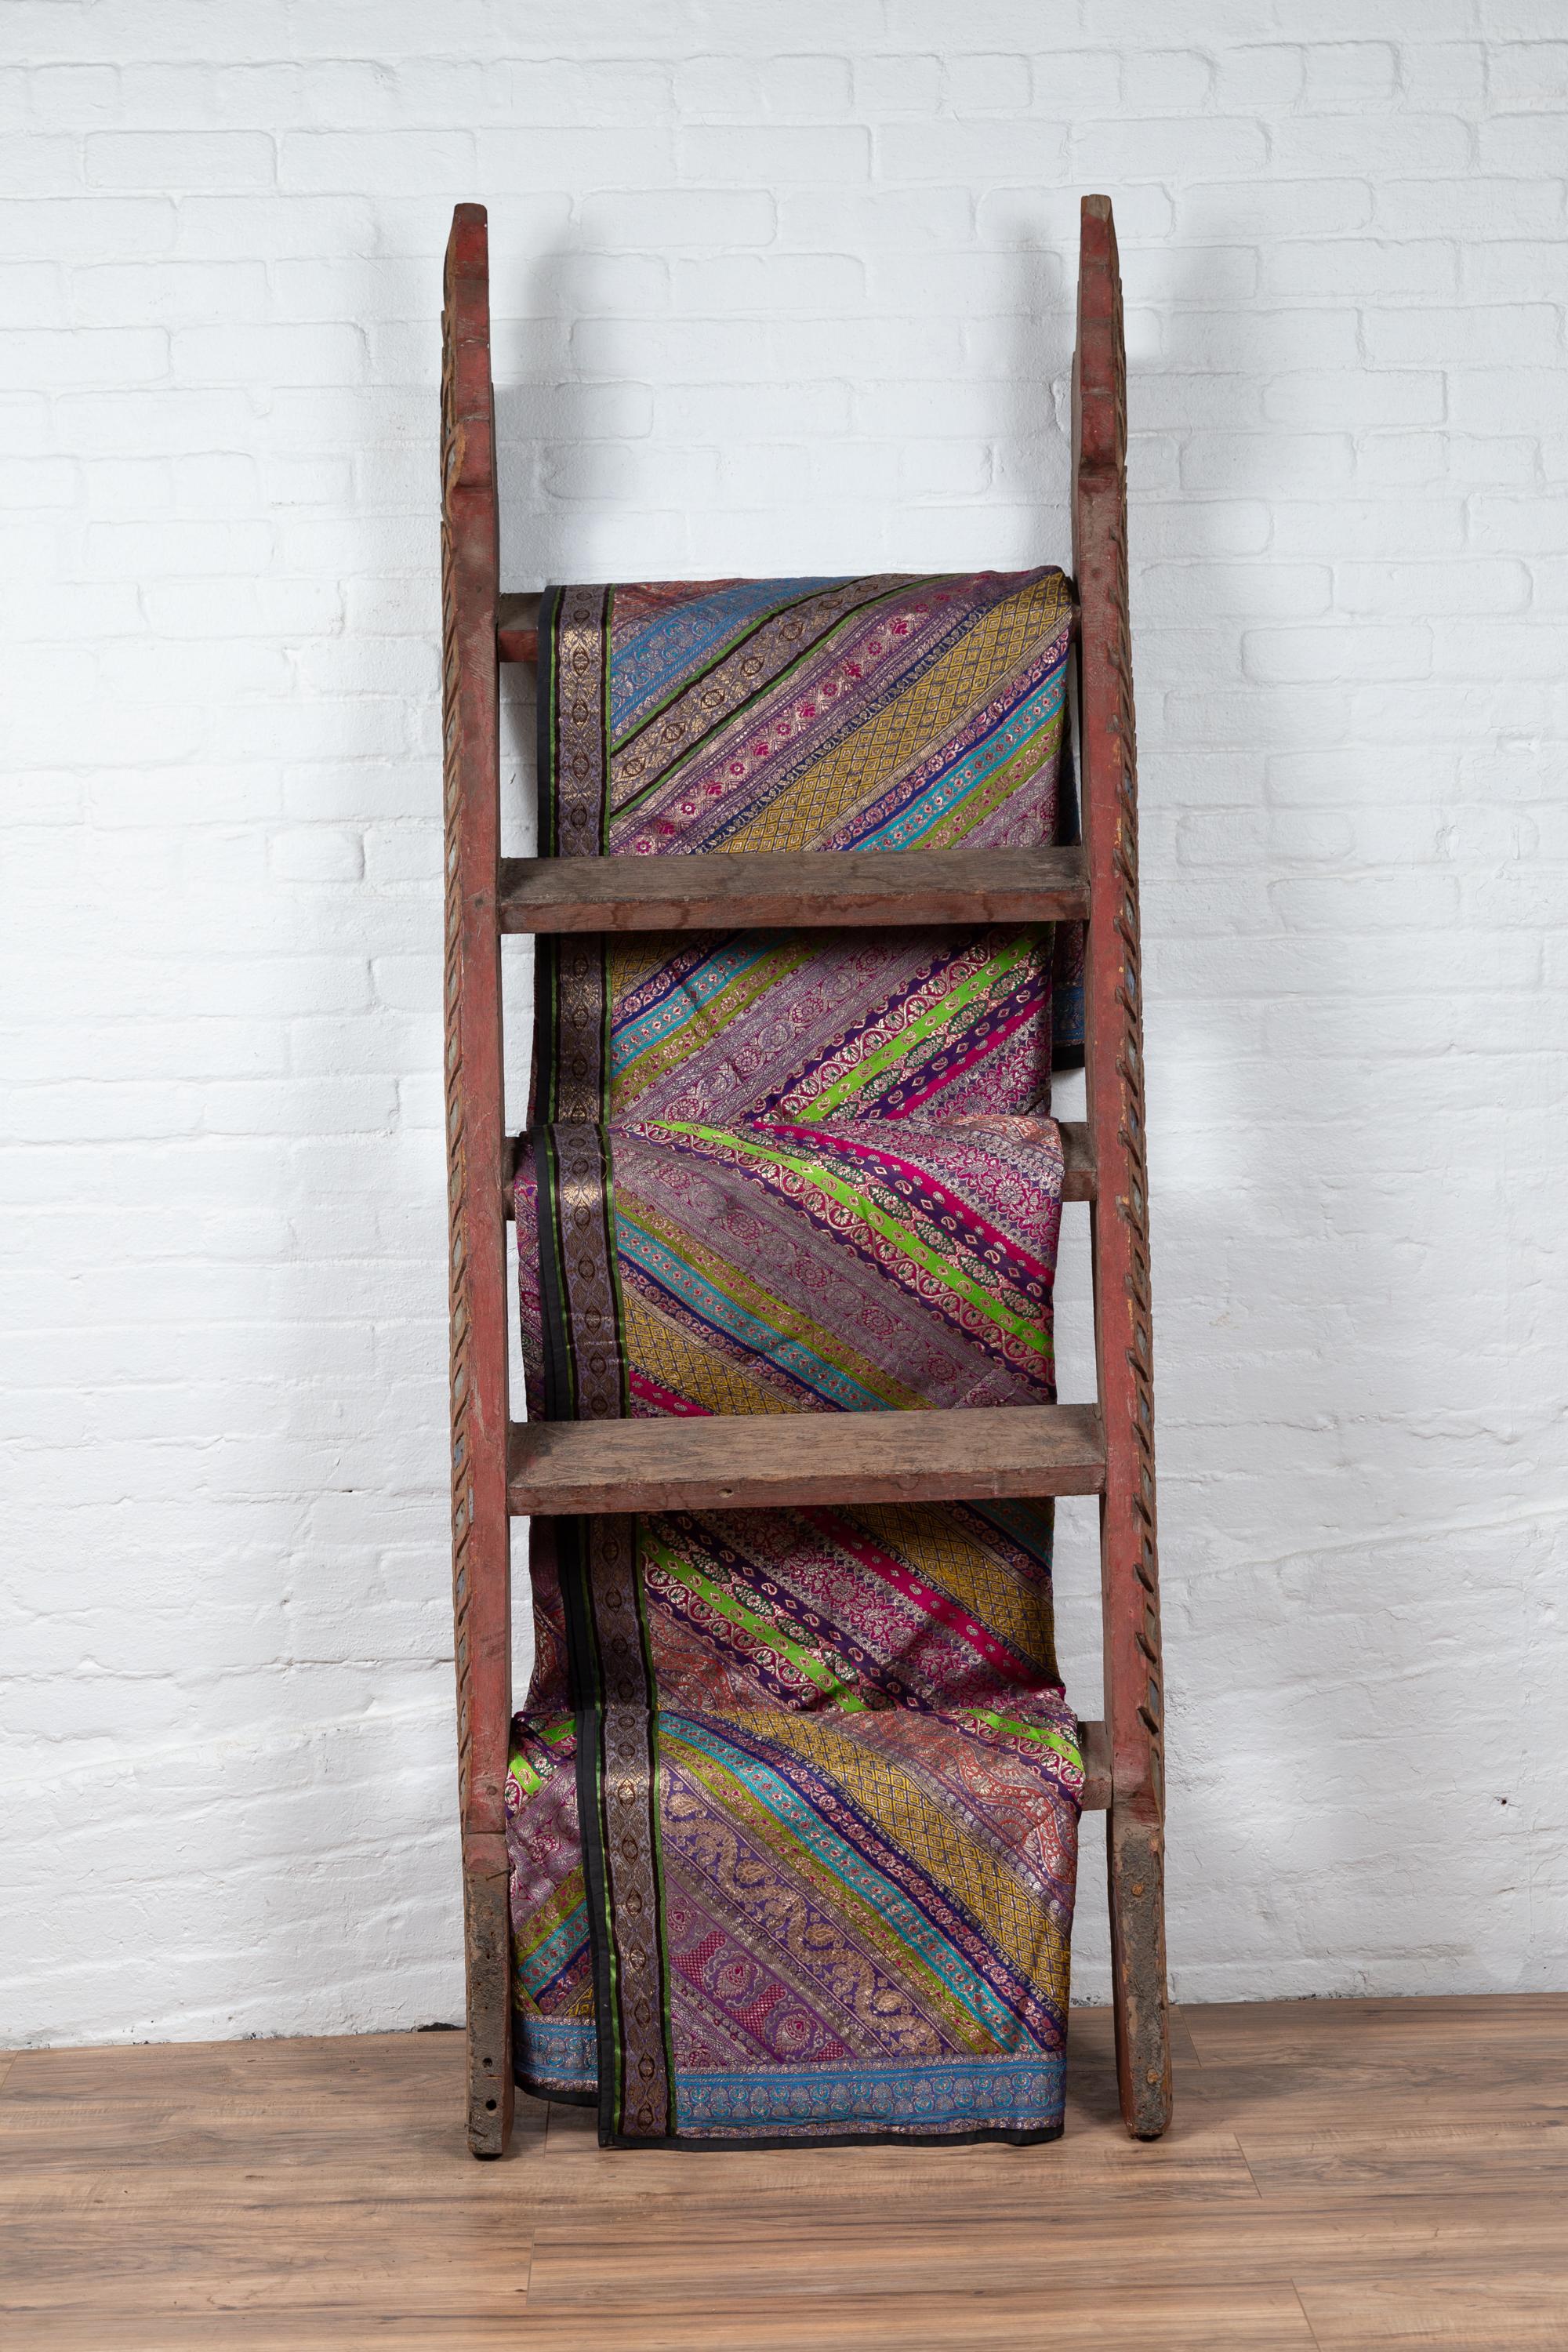 An Indonesian pink / light red hand carved ladder from the early 20th century with flaming shape and colorful glass inlay. Born in Indonesia during the early years of the 20th century, this charming painted ladder will be a wonderful decorative